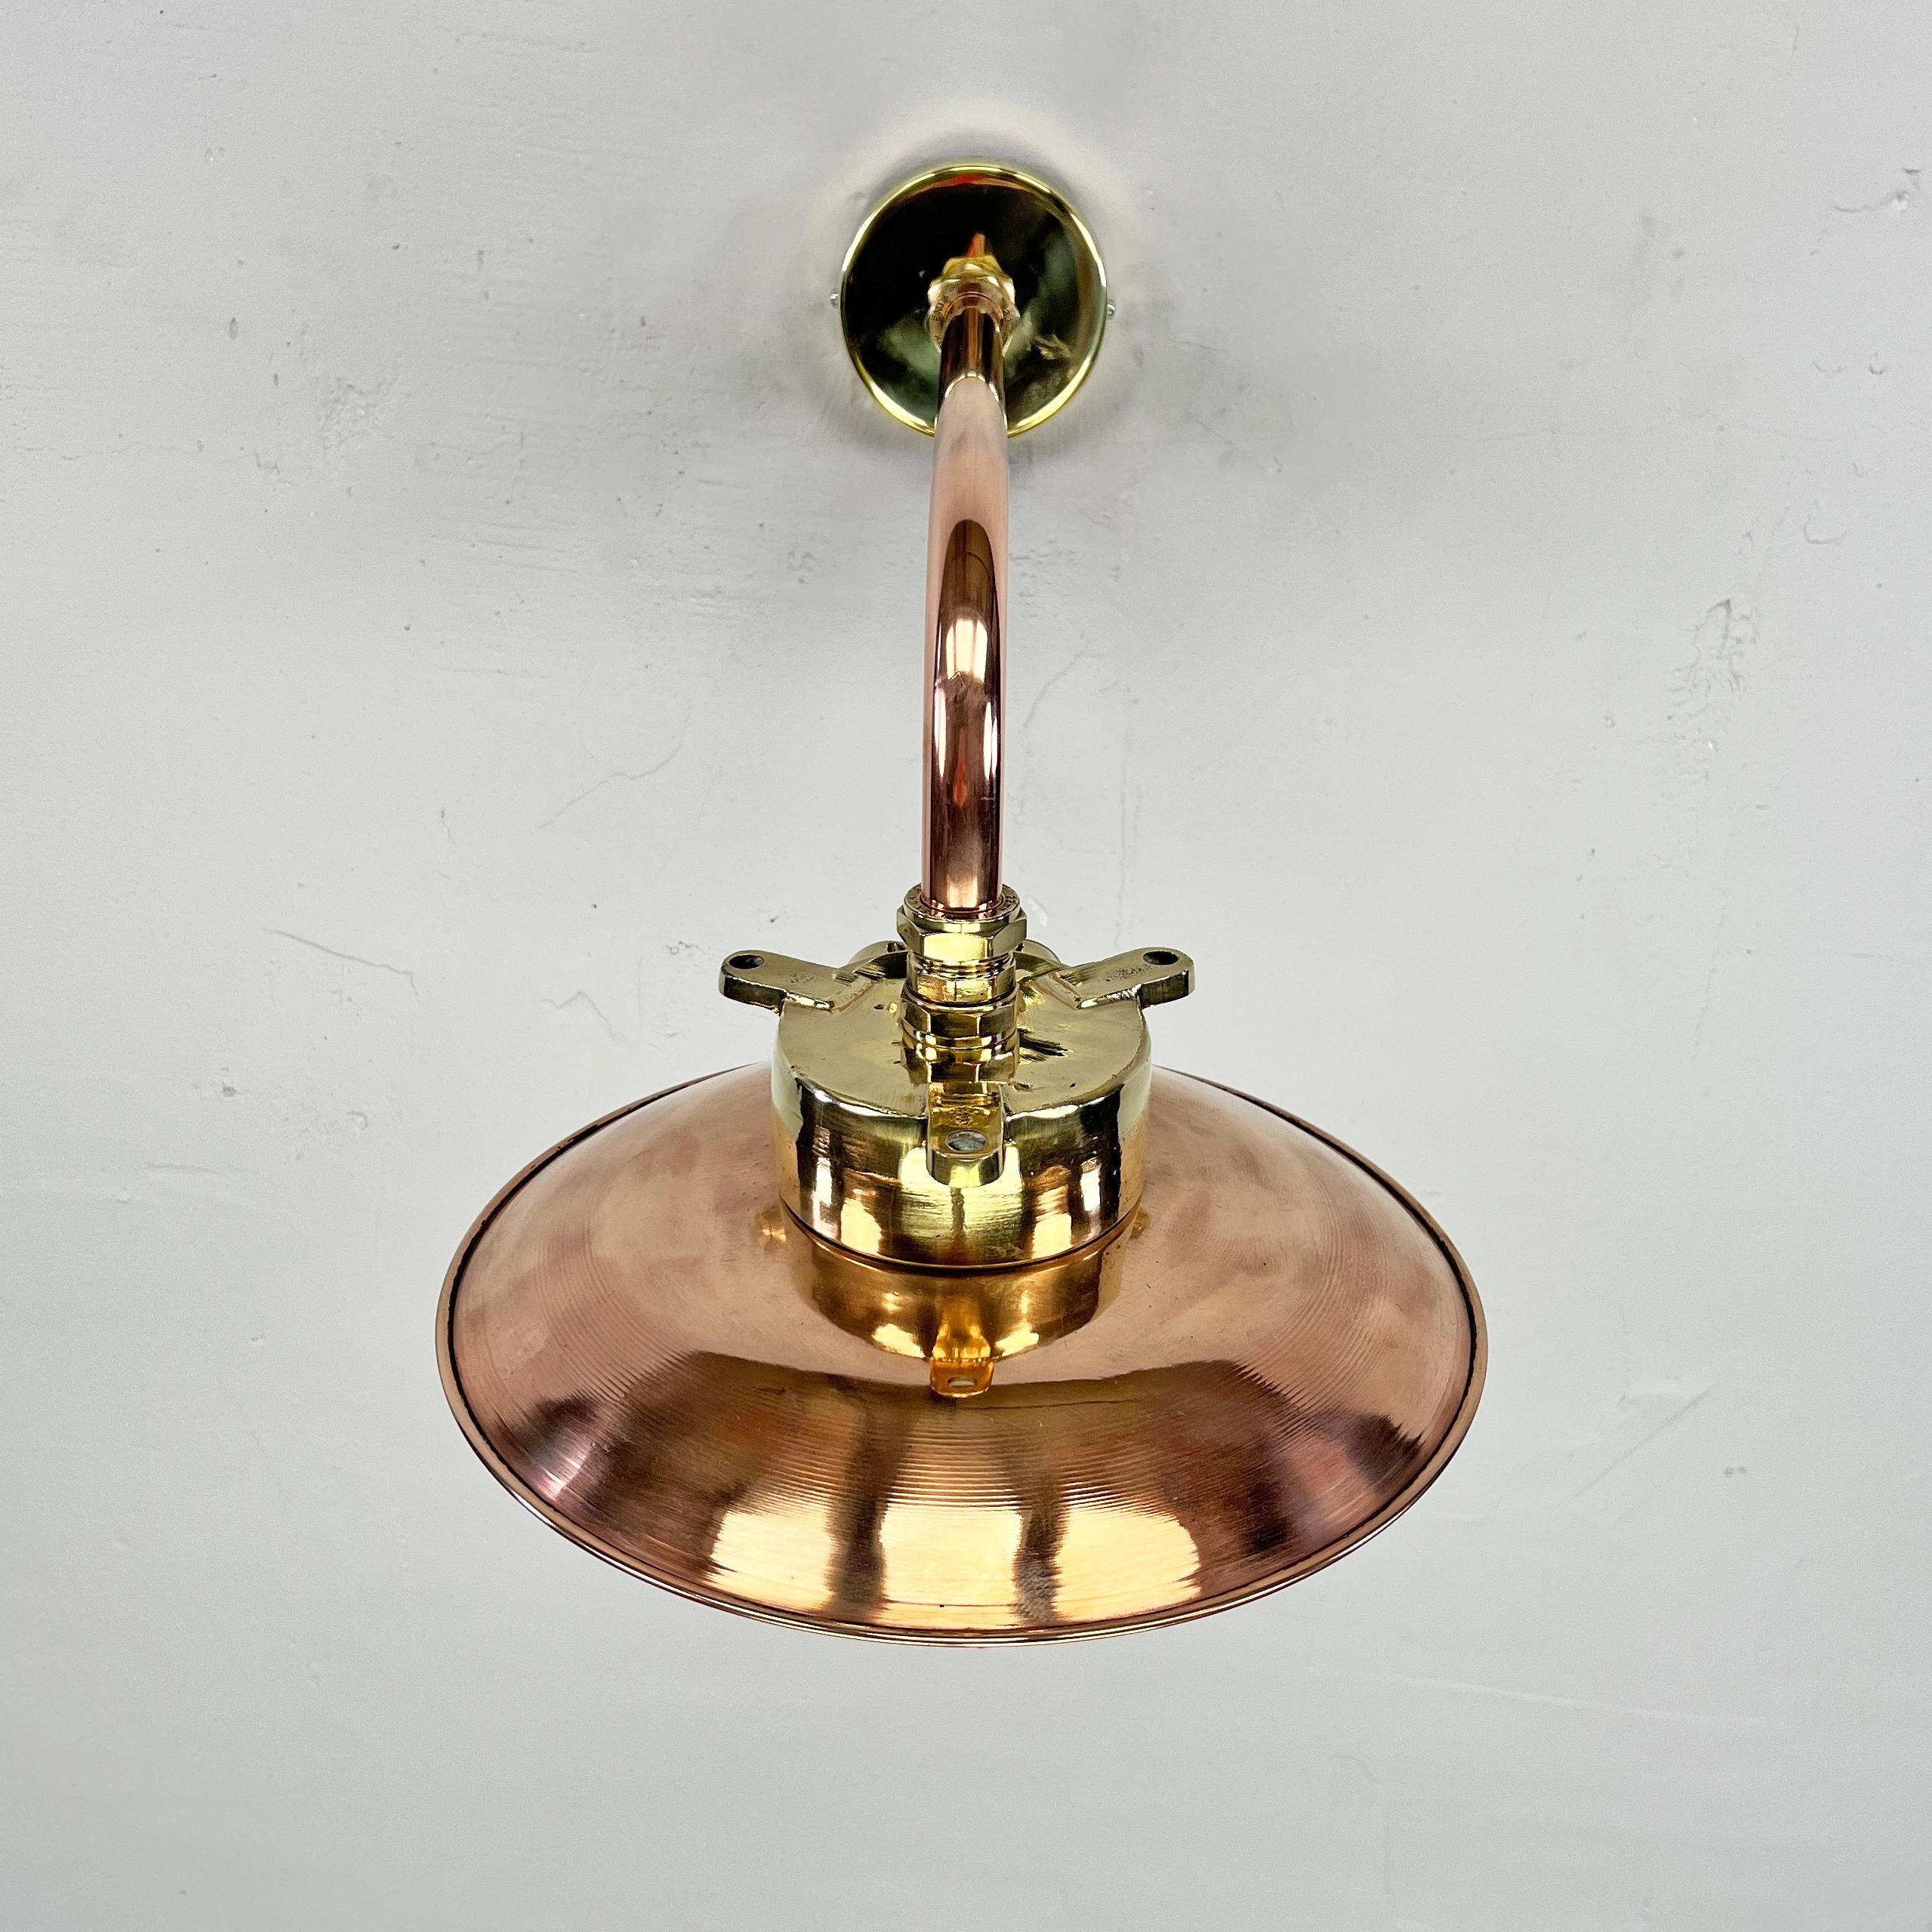 1970s Japanese Cast Brass and Copper Explosion Proof Caged Cantilever Wall Light For Sale 2